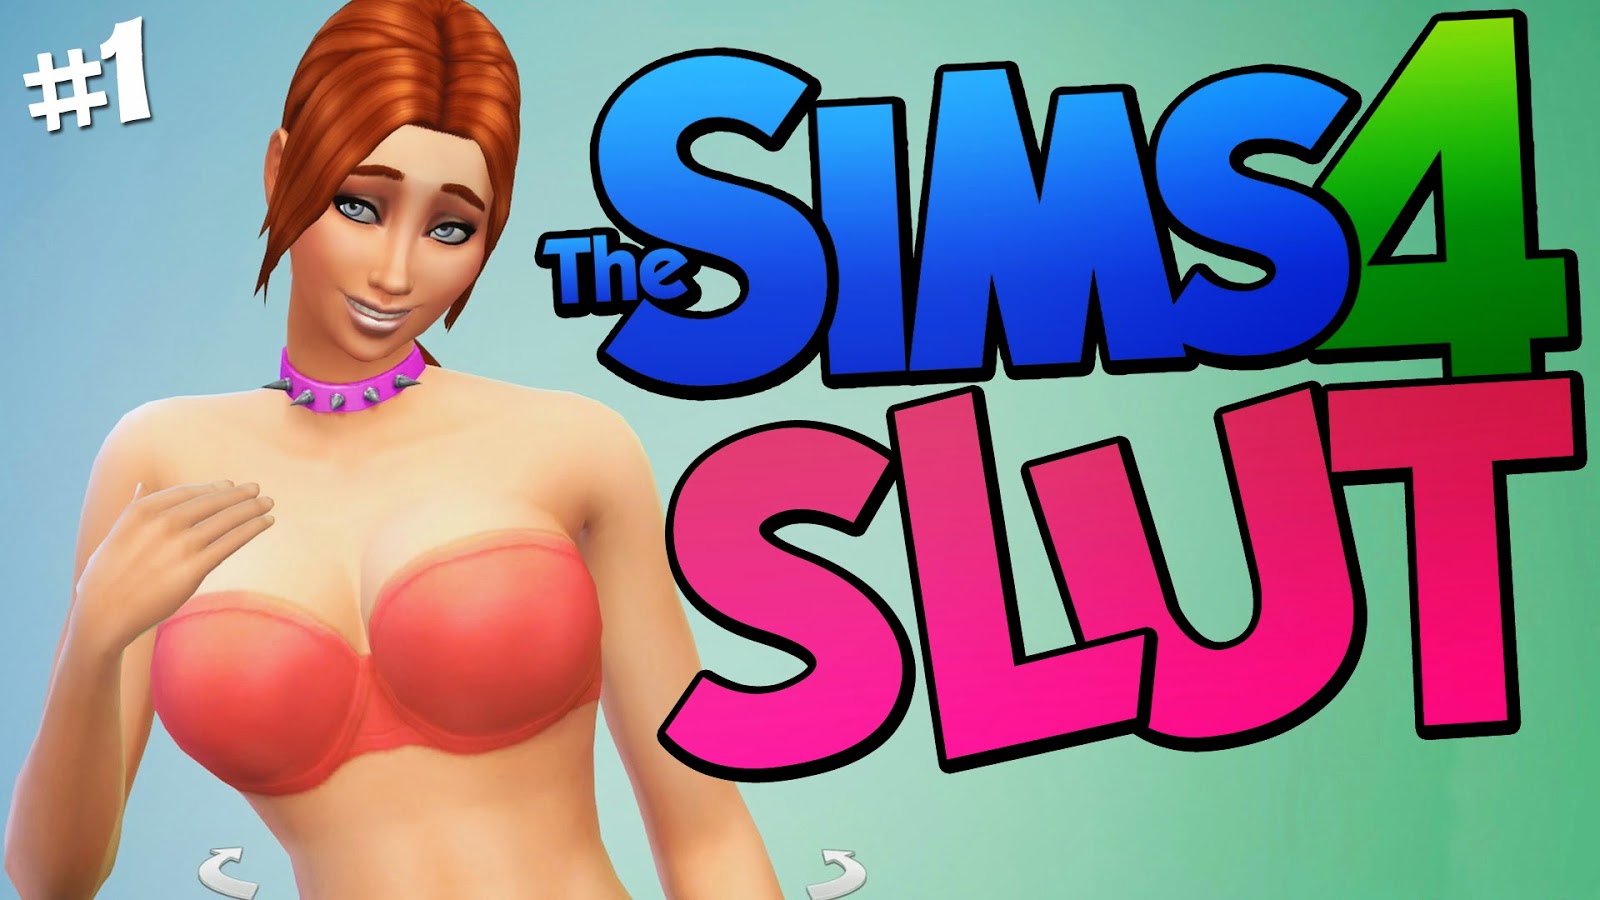 Download latest sims 4 patch